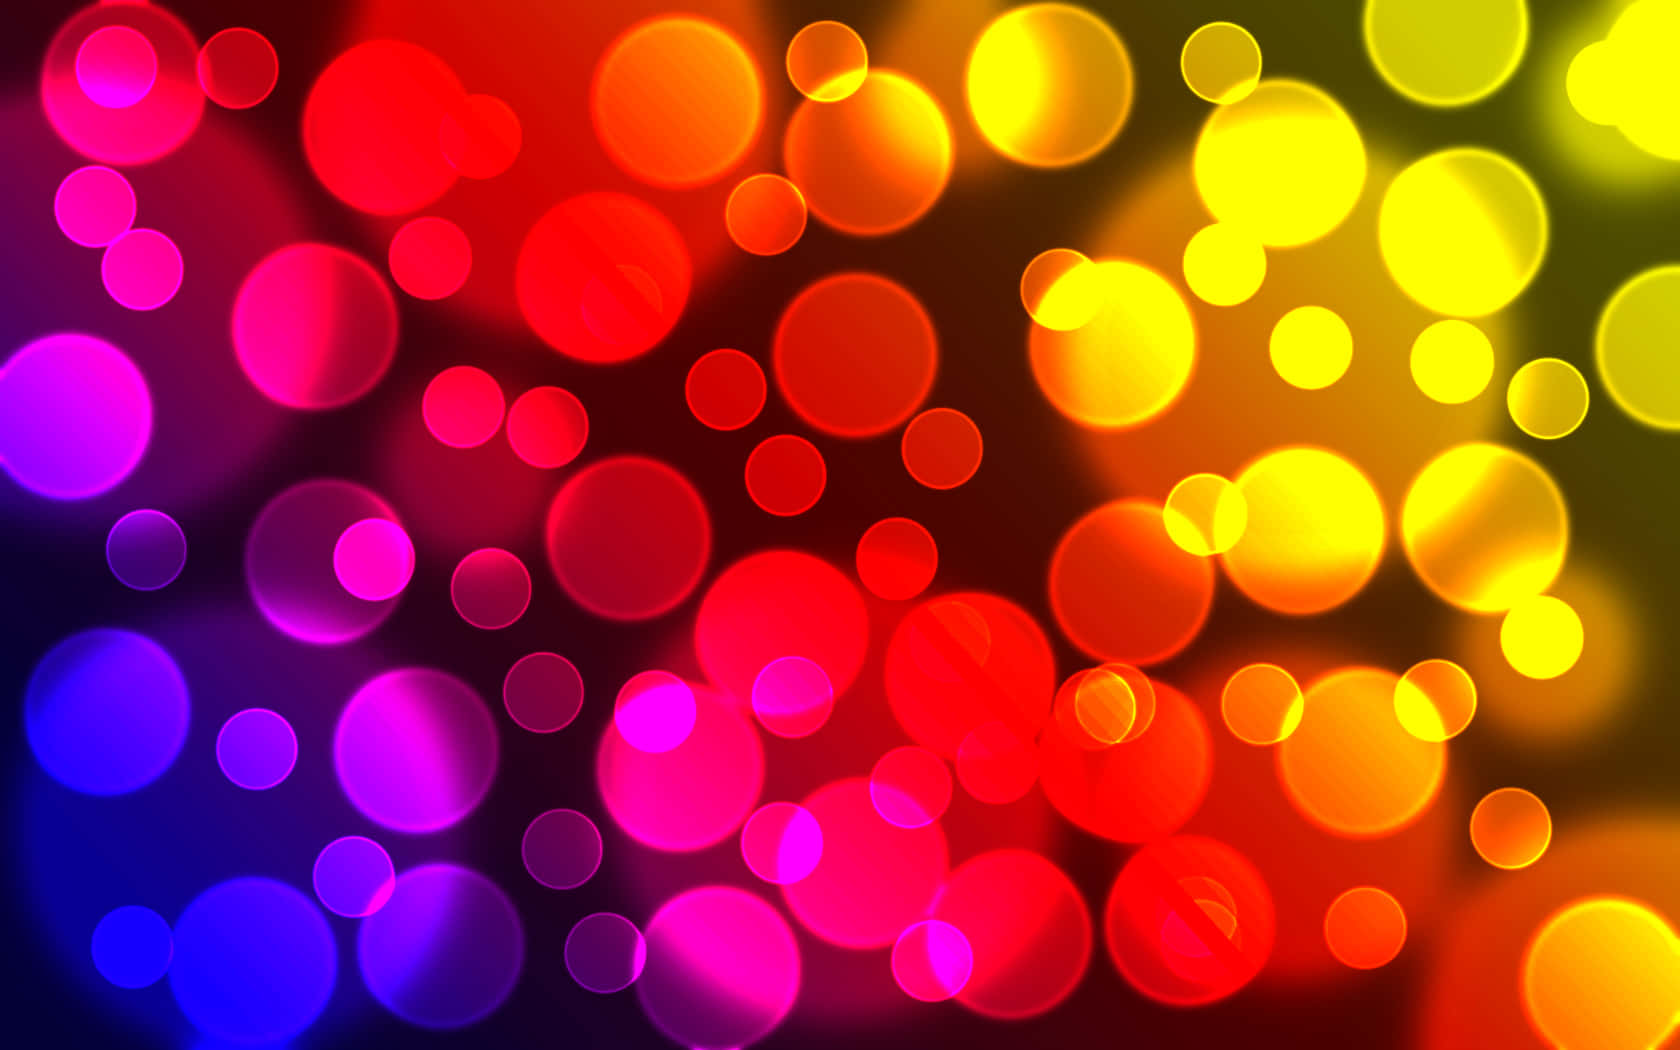 A Colorful Background With Many Lights